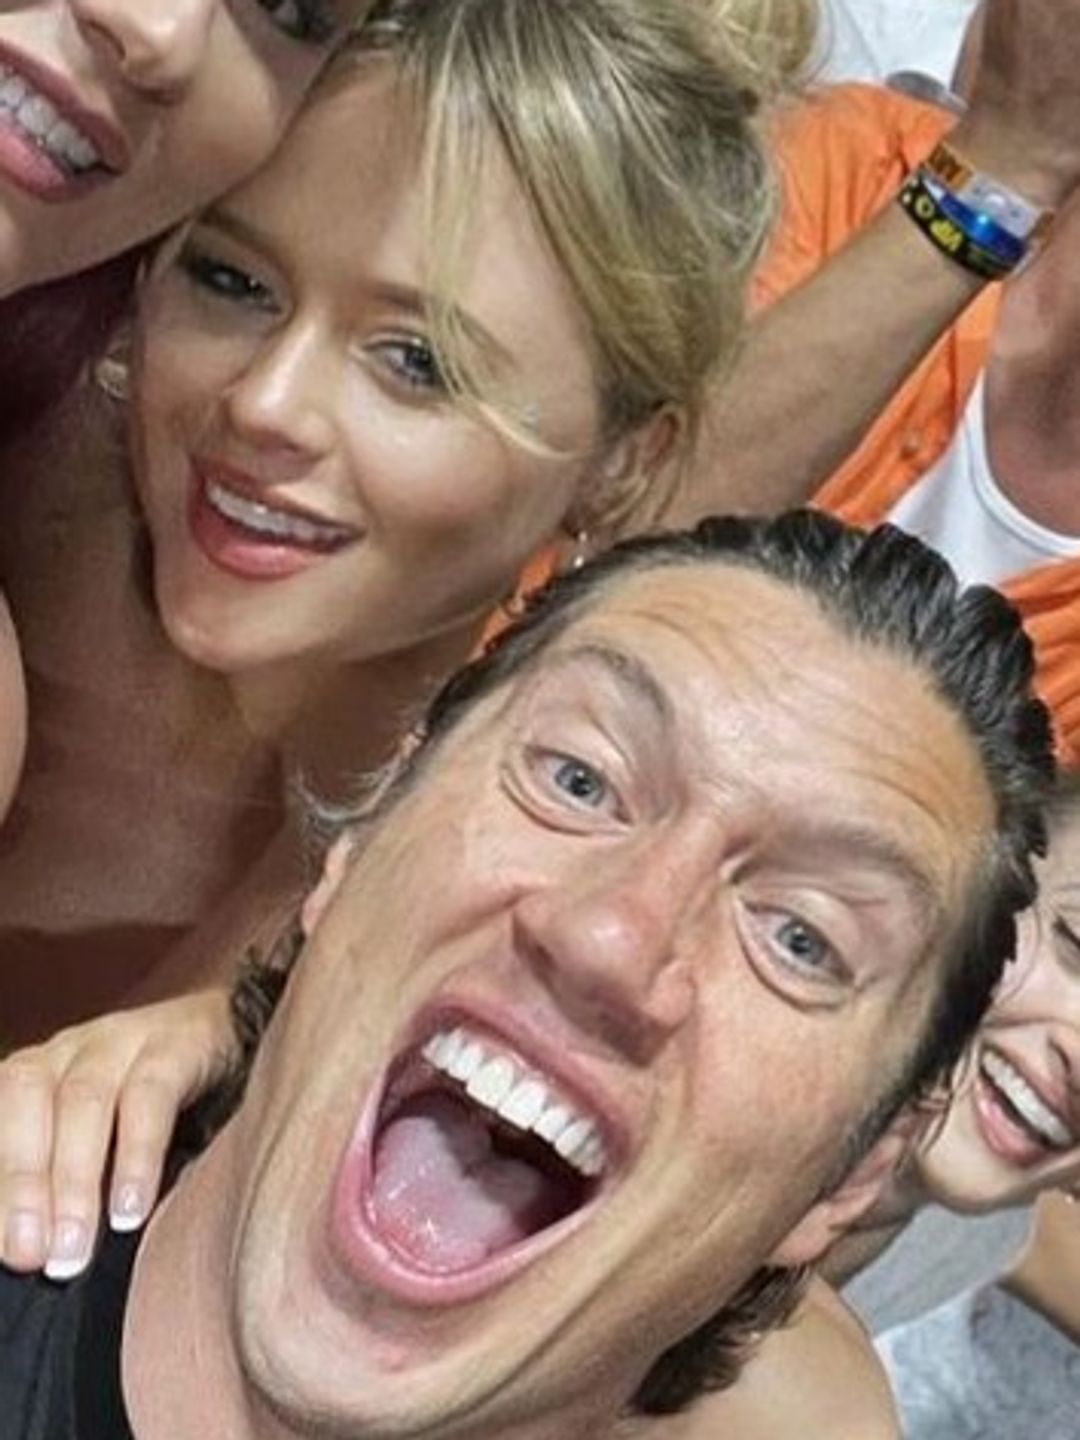 Vernon Kay parties with Emily Atack